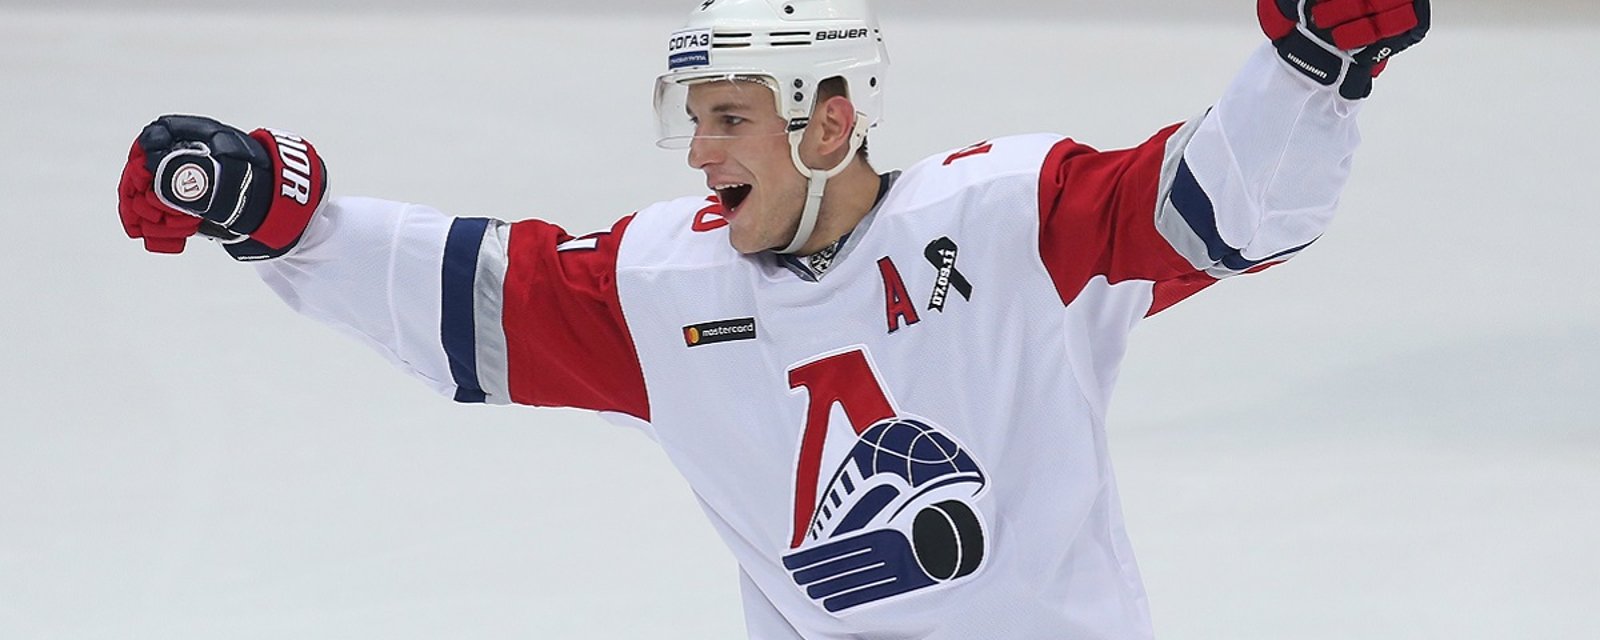 KHL defenseman Alexander Yelesin has signed with an NHL team.